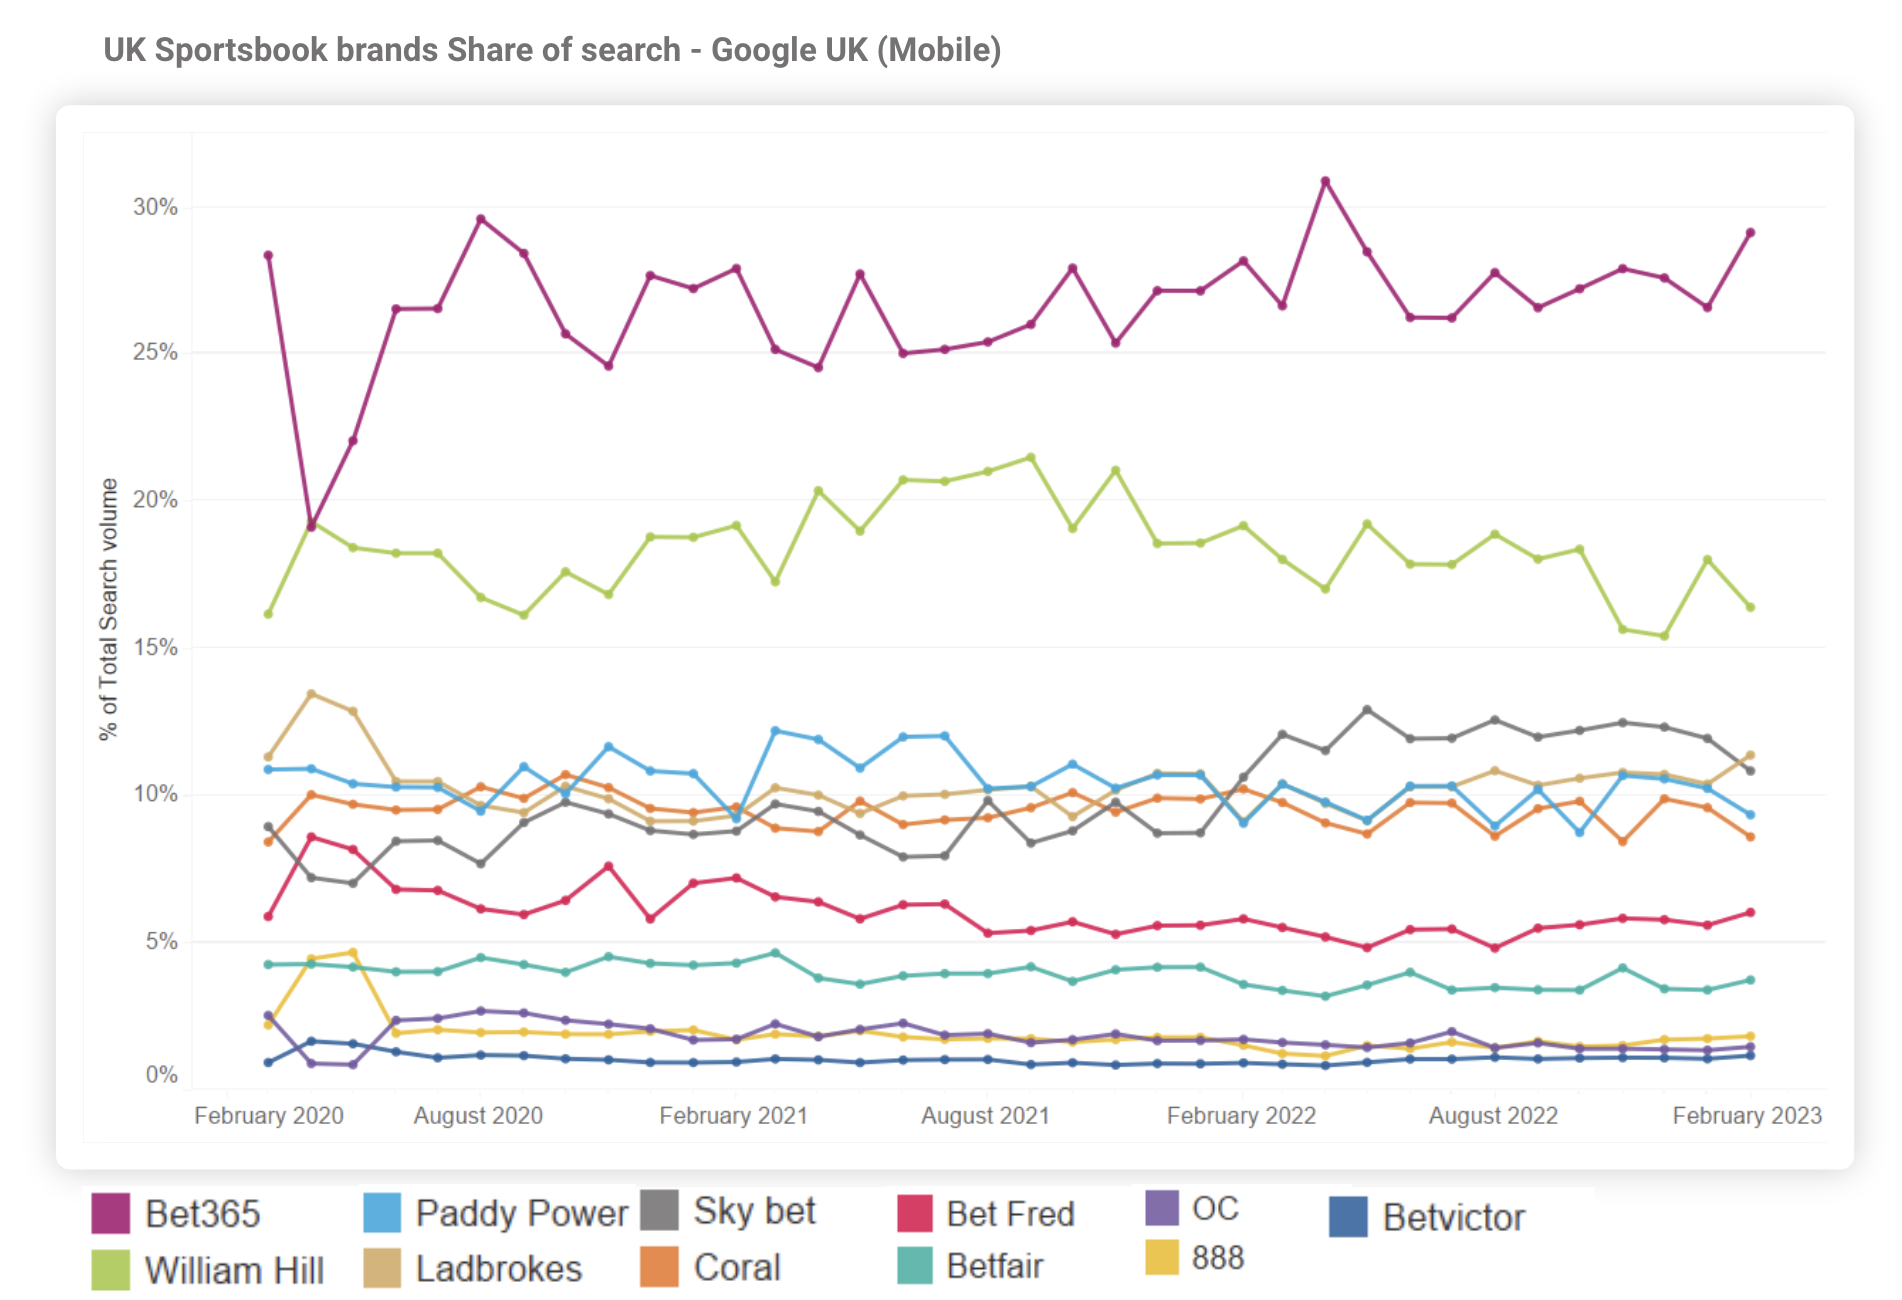 Share of brand search - gambling UK - search volume